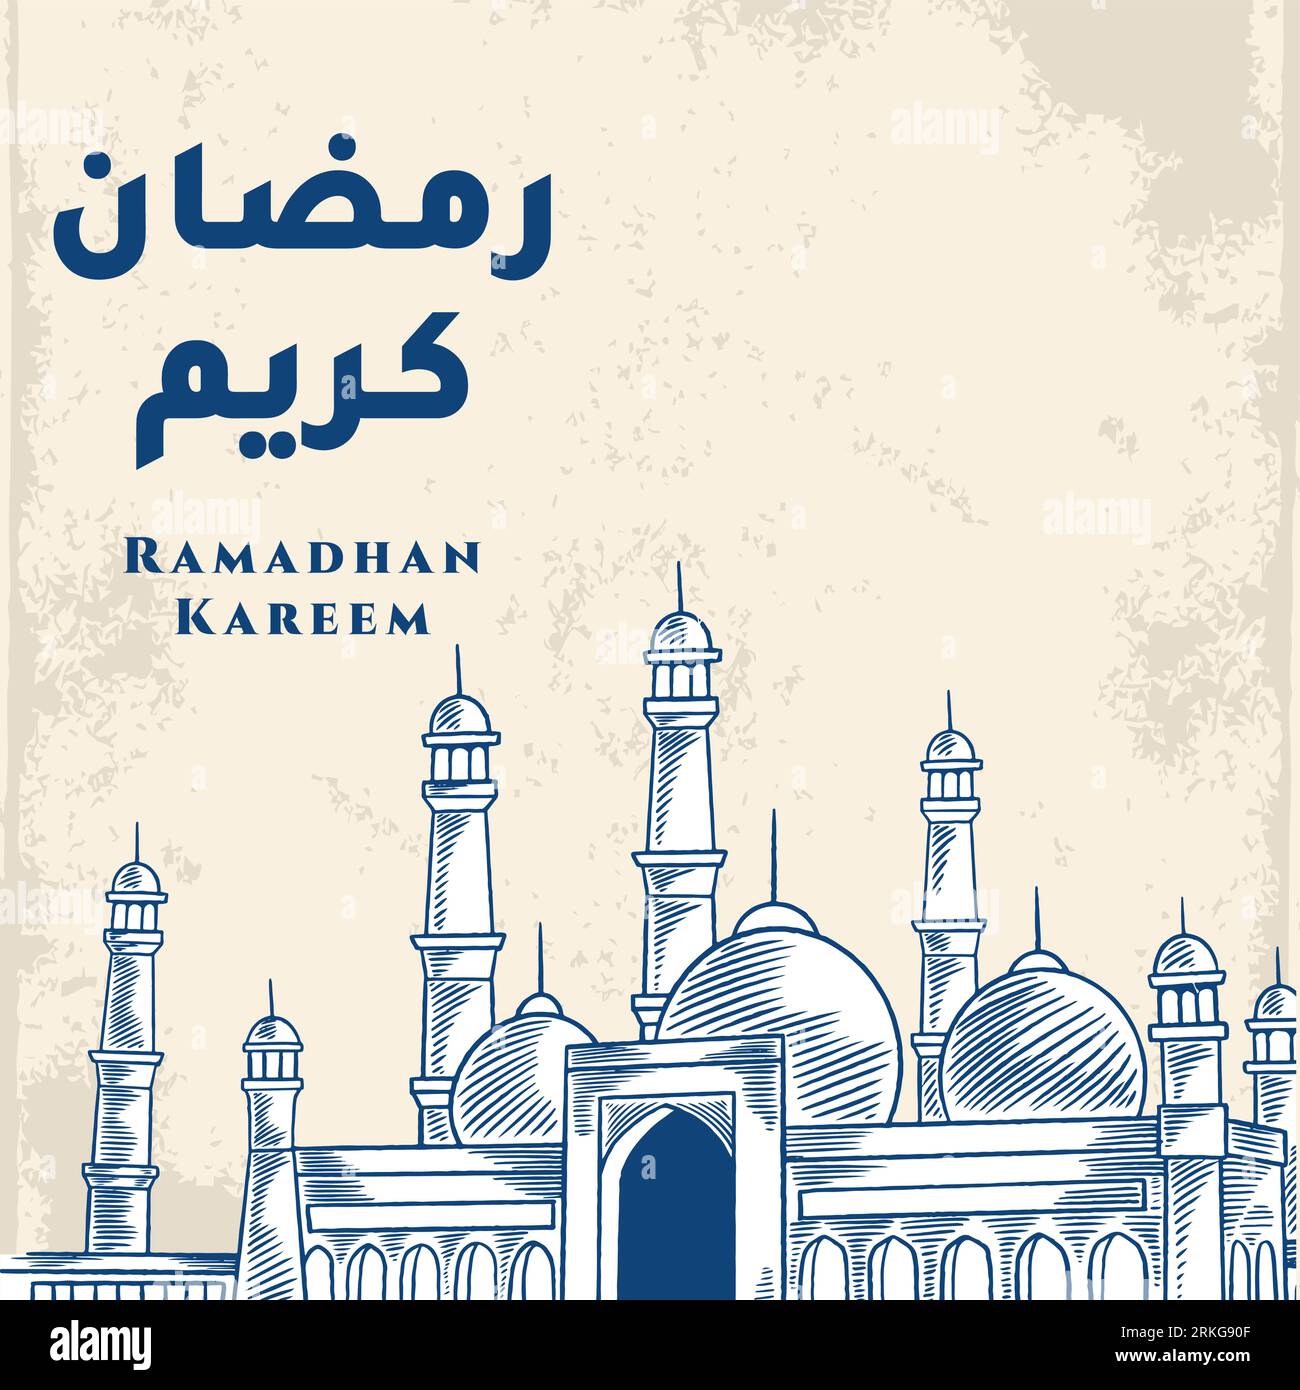 Ramadan Kareem greeting card with blue big mosque sketch. Arabic calligraphy means 'Holly Ramadan'. Isolated on white background. Stock Vector